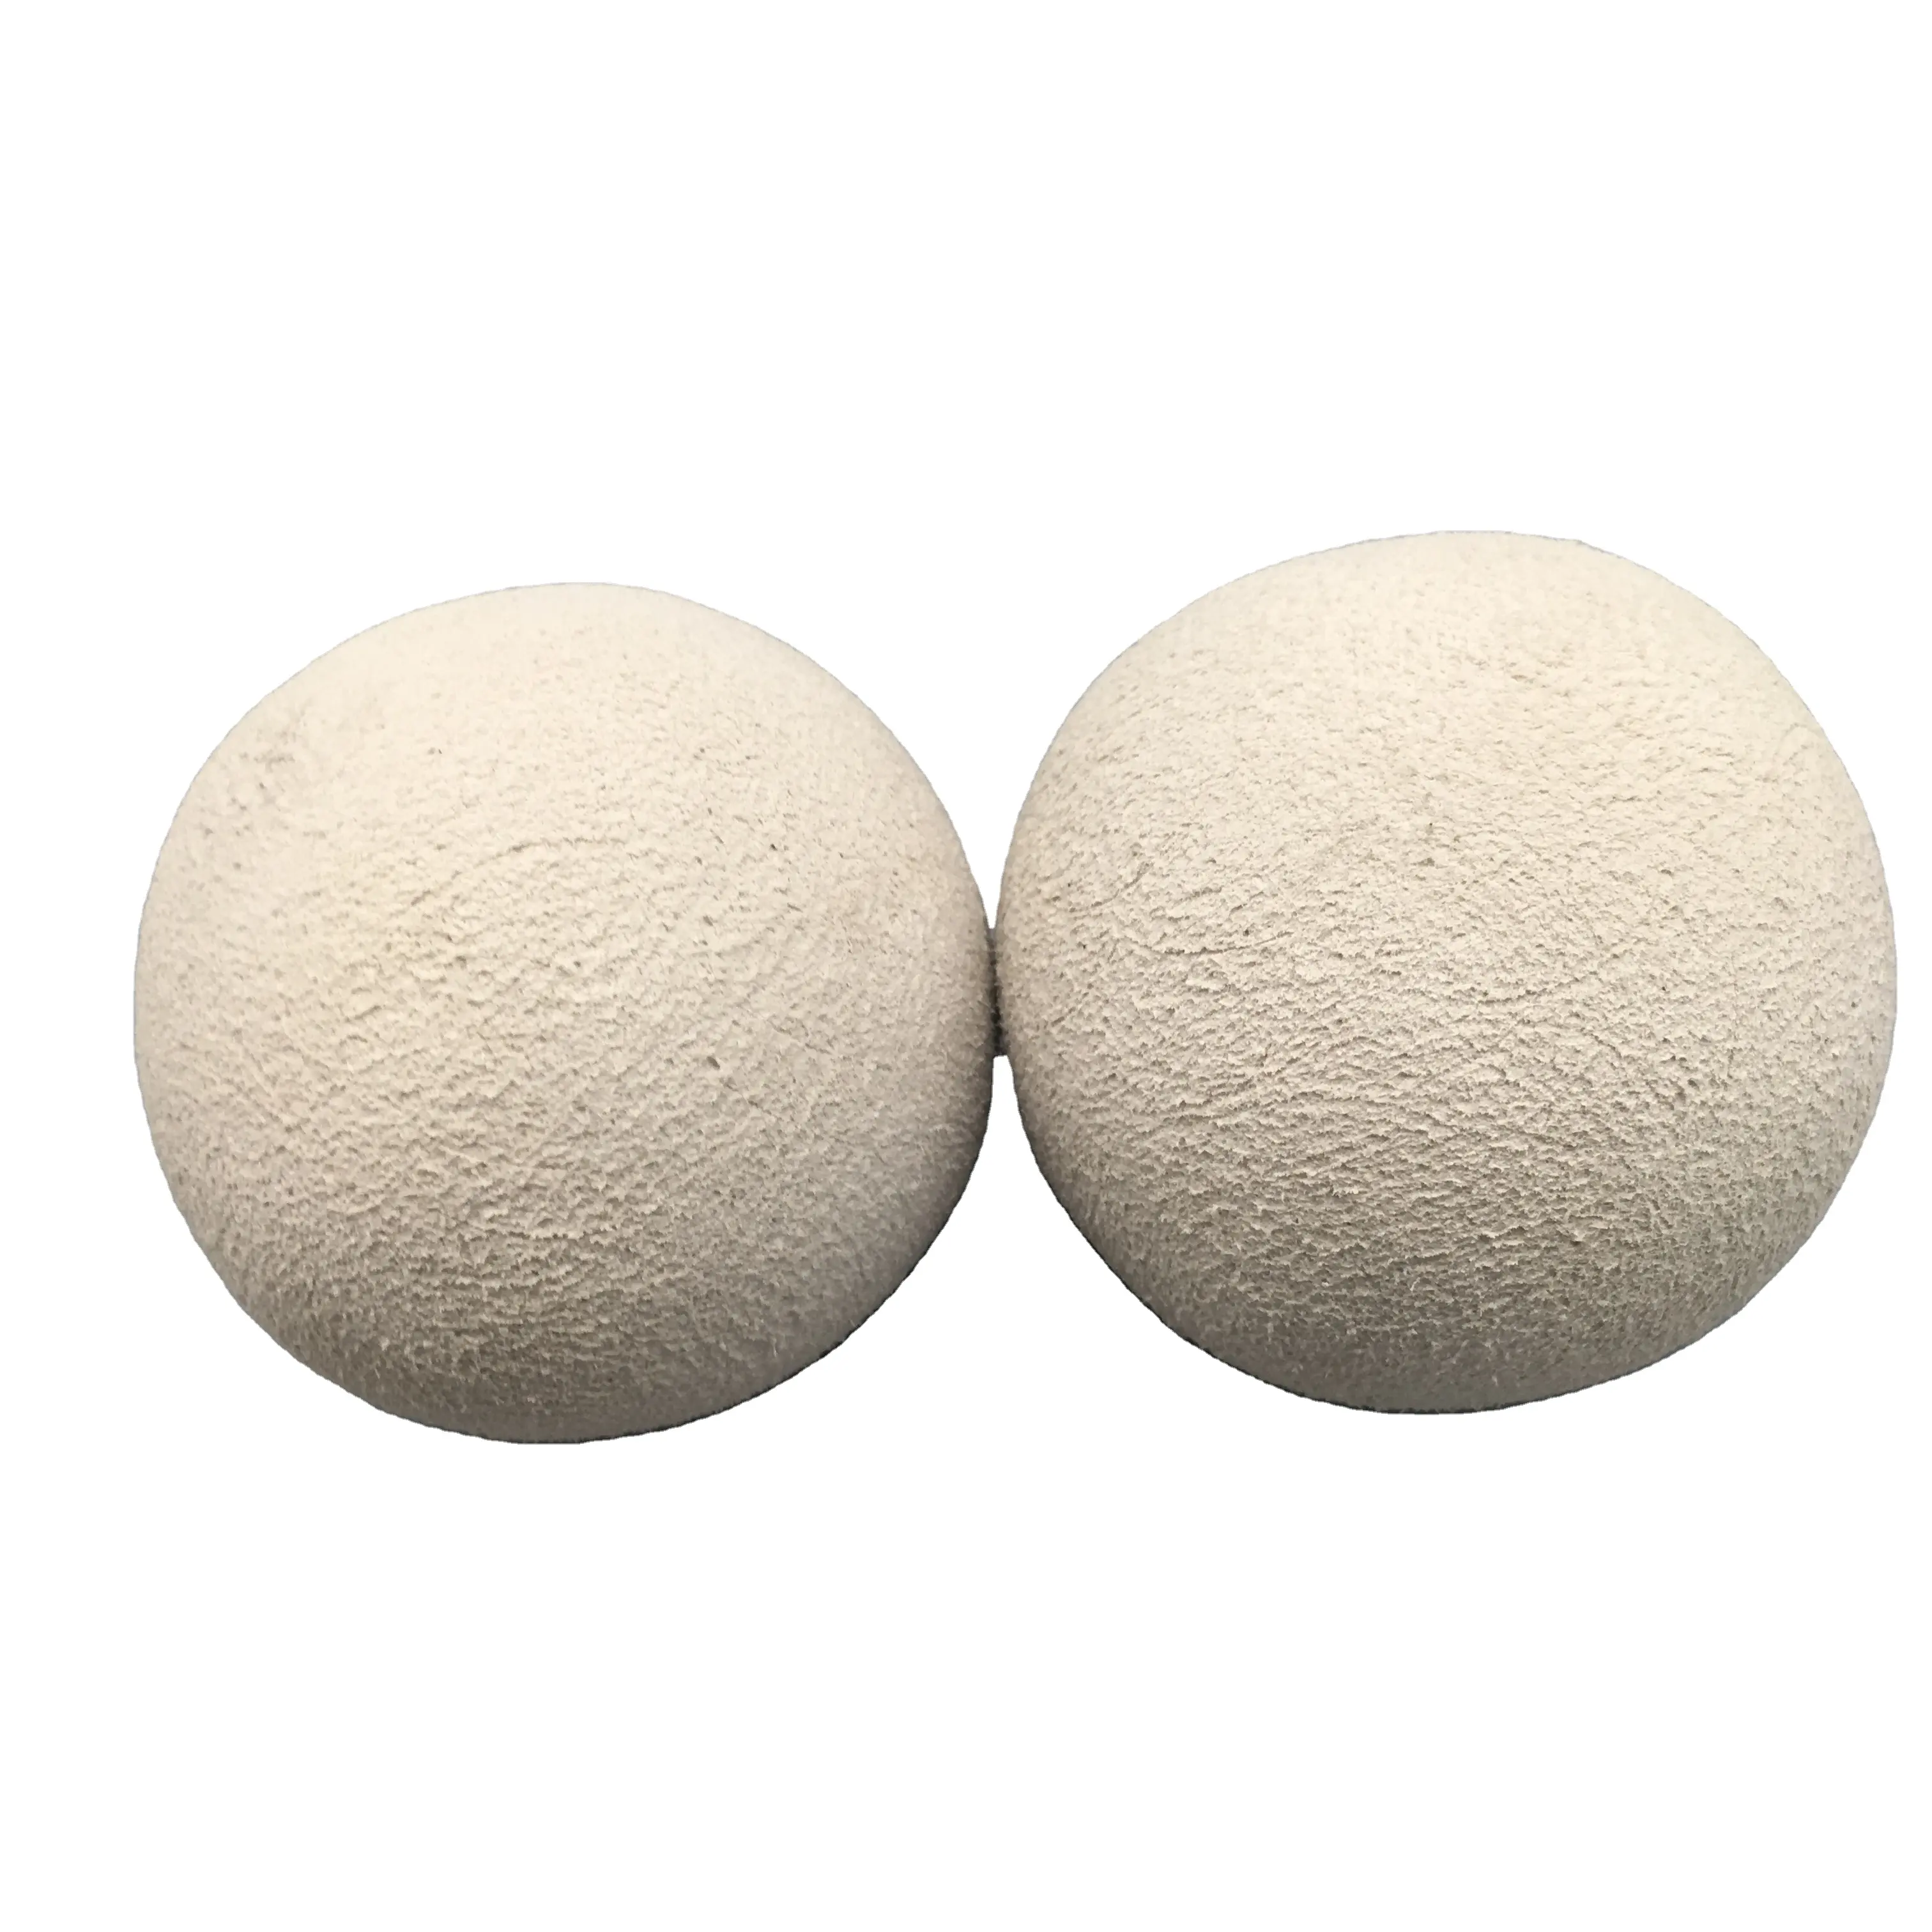 natural eco friendly Washing Jeans Ball laundry Clean balls For Jeans wrinkles and distortion felt wool balls dryer